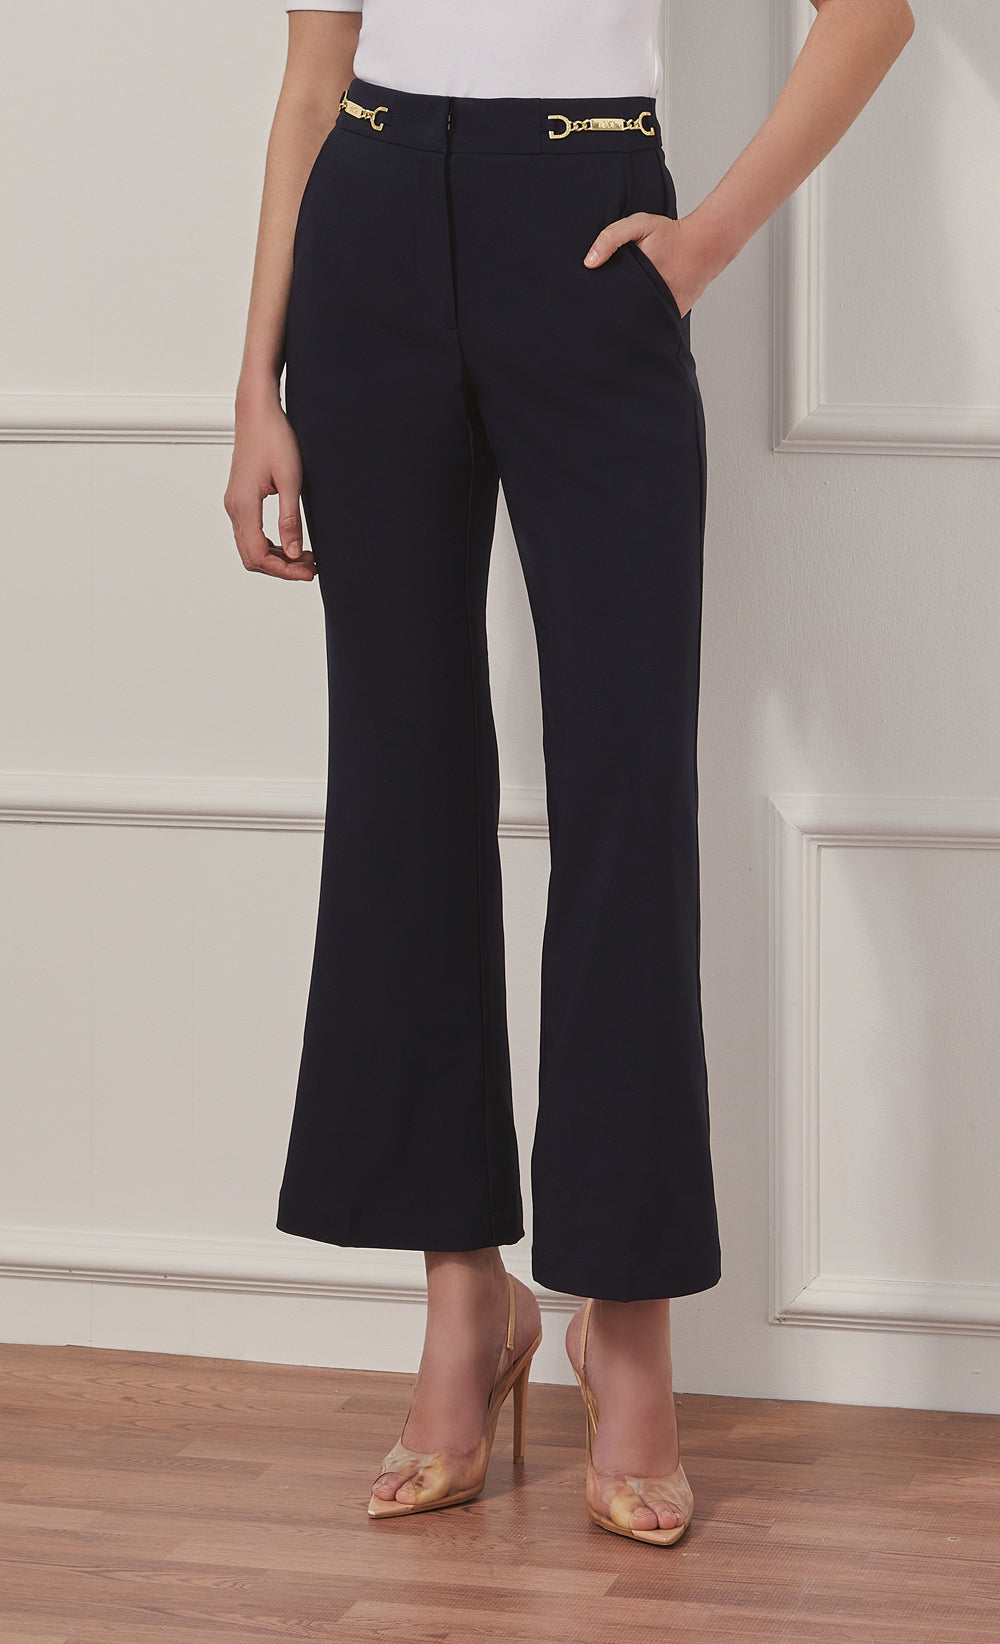 Carey Pants in Navy – The dUCk Group